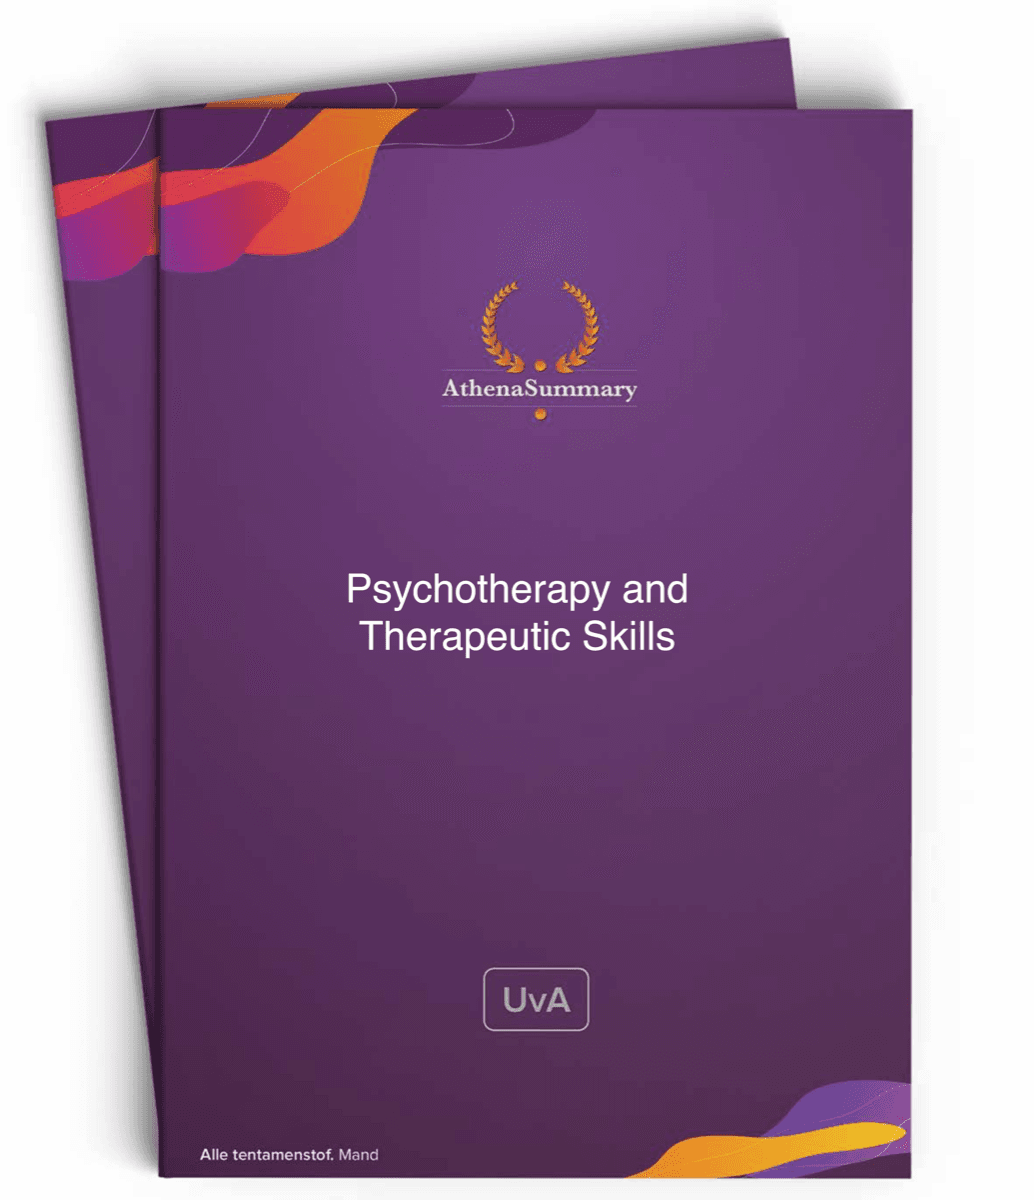 Literature Summary: Psychotherapy and Therapeutic Skills